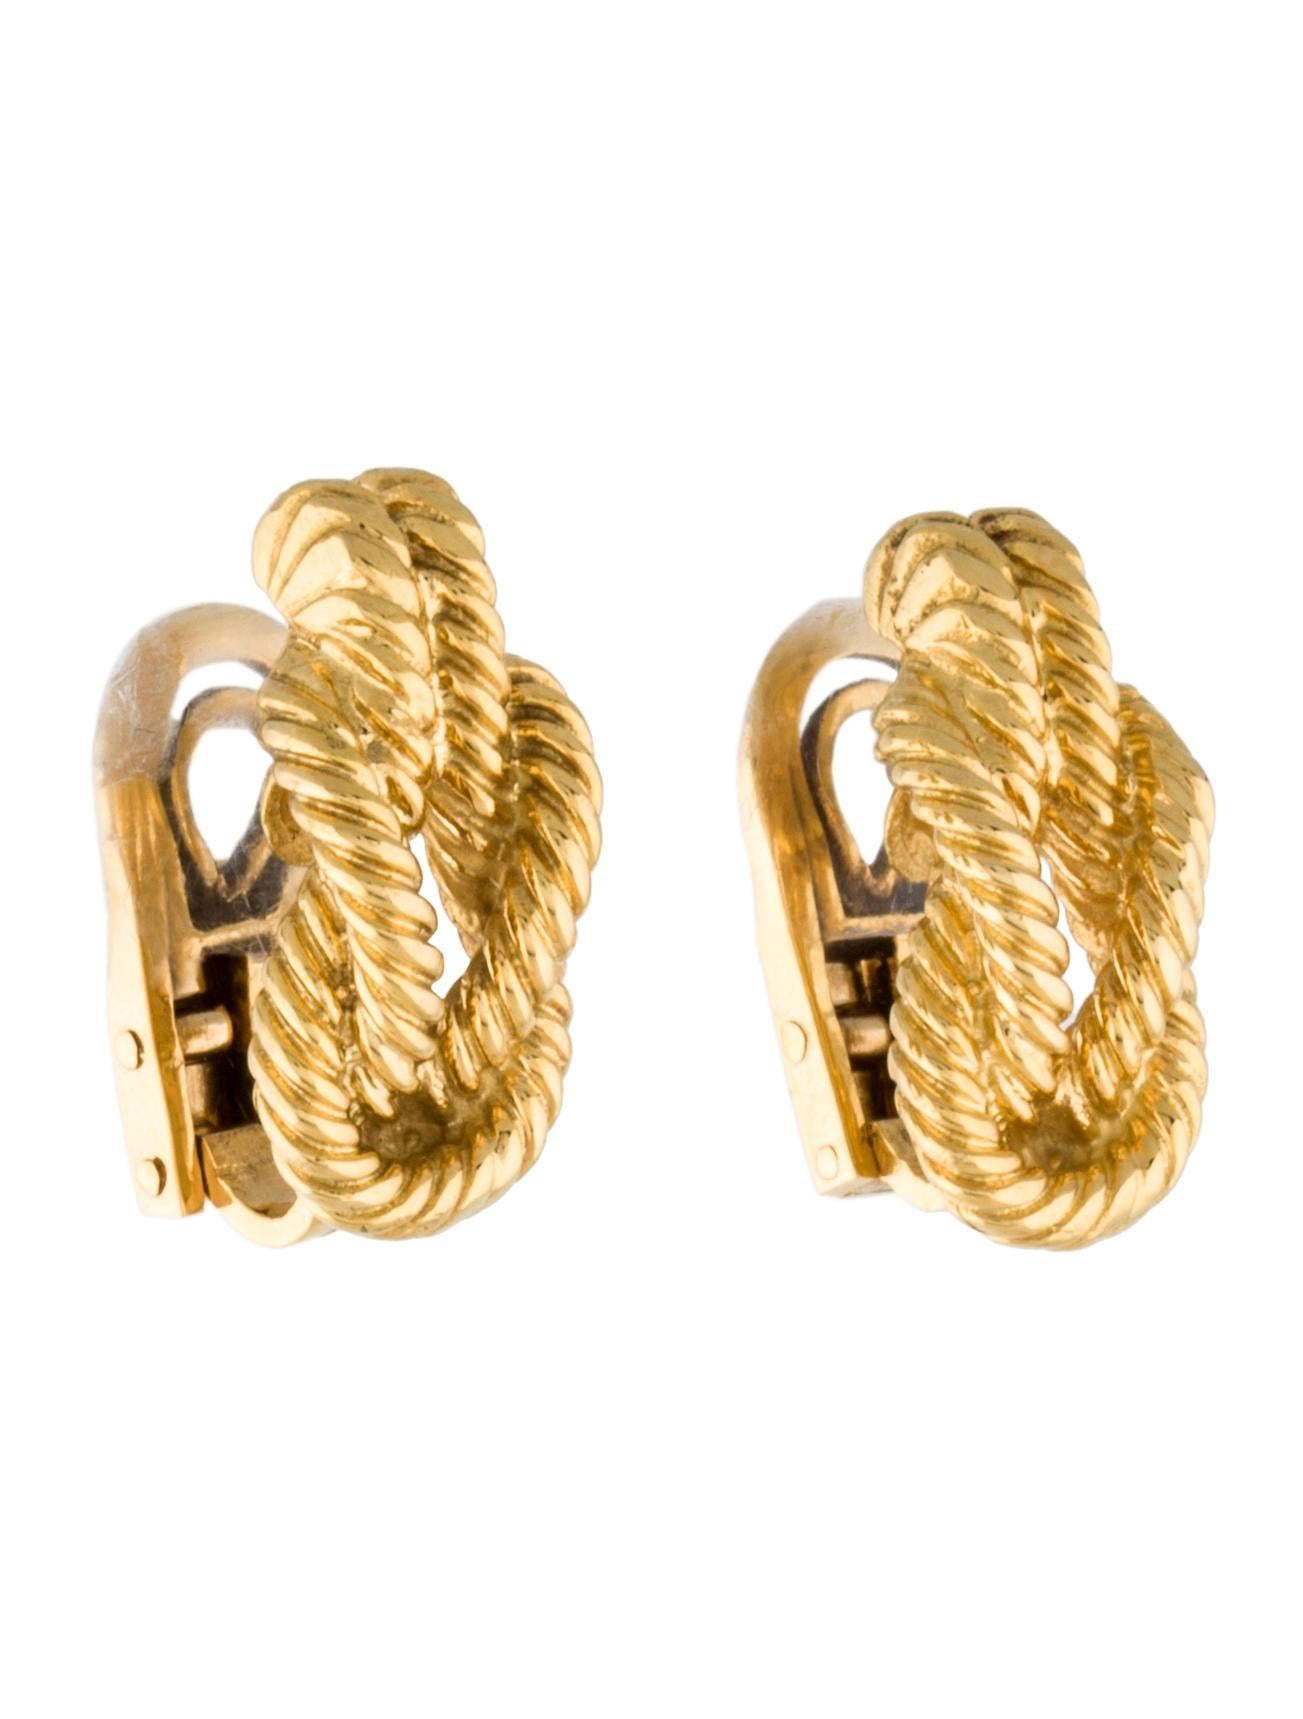 18K yellow gold Hermès Parade Knot earrings with omega back closures. Includes box.

Metal Type: 18K Yellow Gold
Hallmark: 18K
Signature: Hermes
Location: Back of Piece
Metal Finish: High Polish
Total Item Weight (g): 19.2
Period/Date: